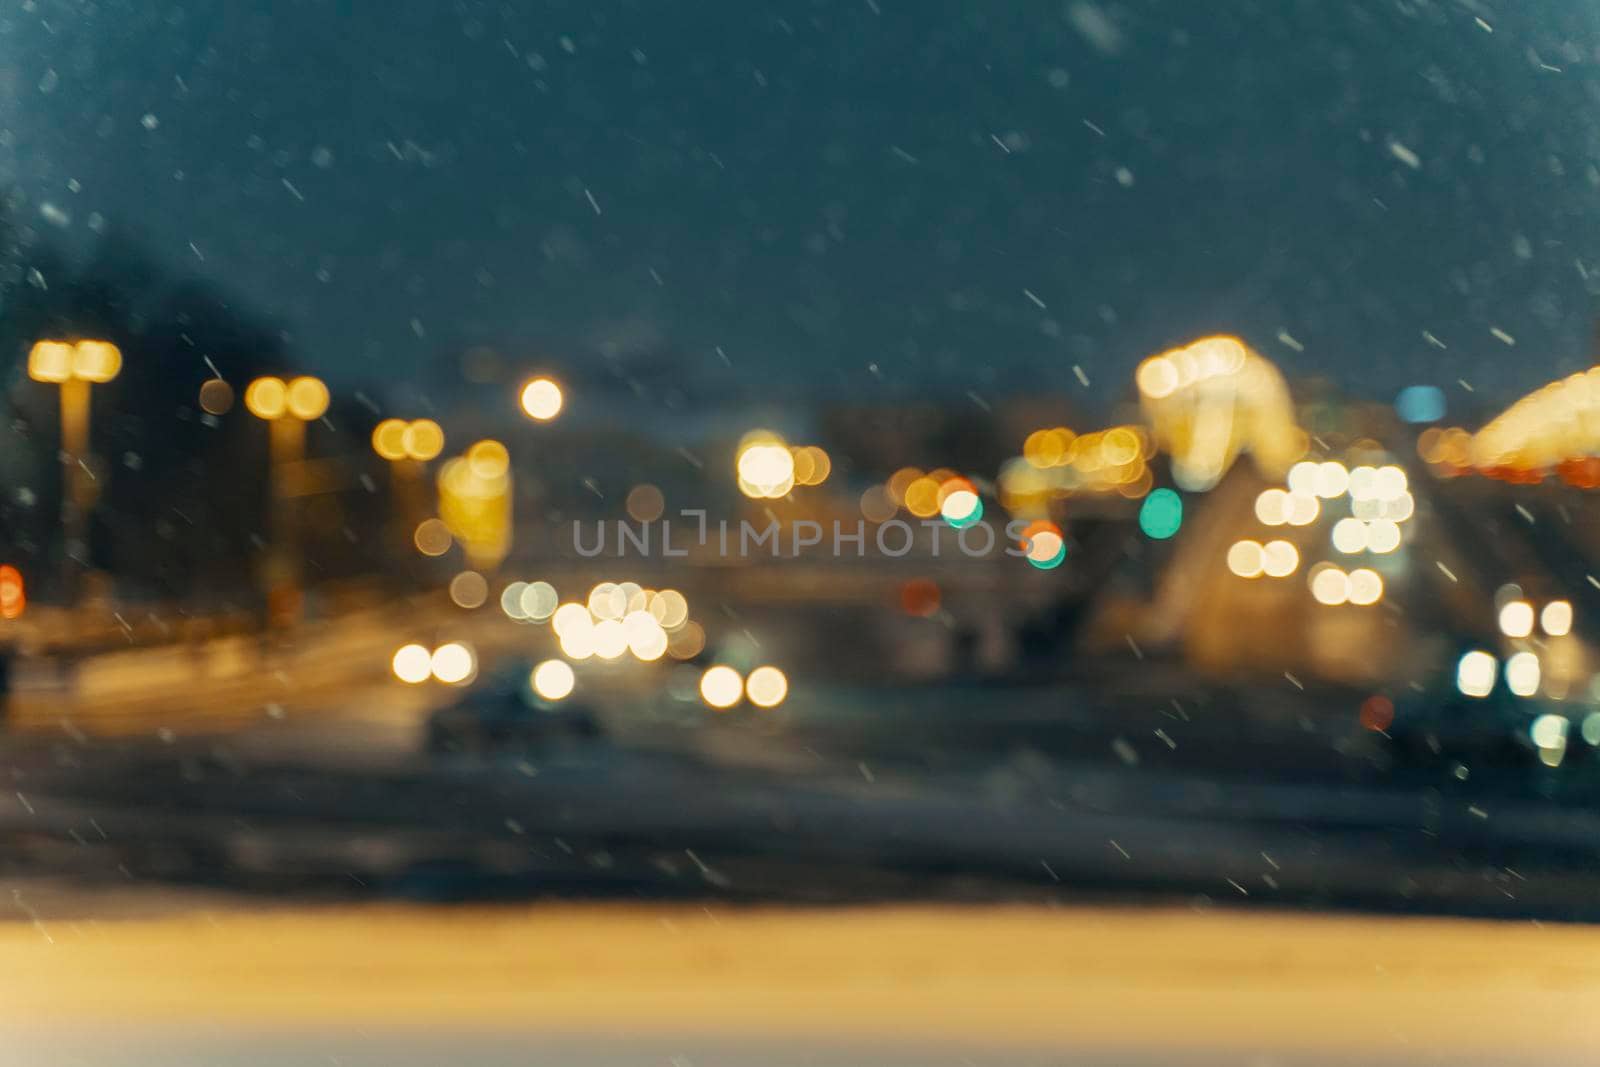 Winter blurred background with falling snow on the background of a city street.